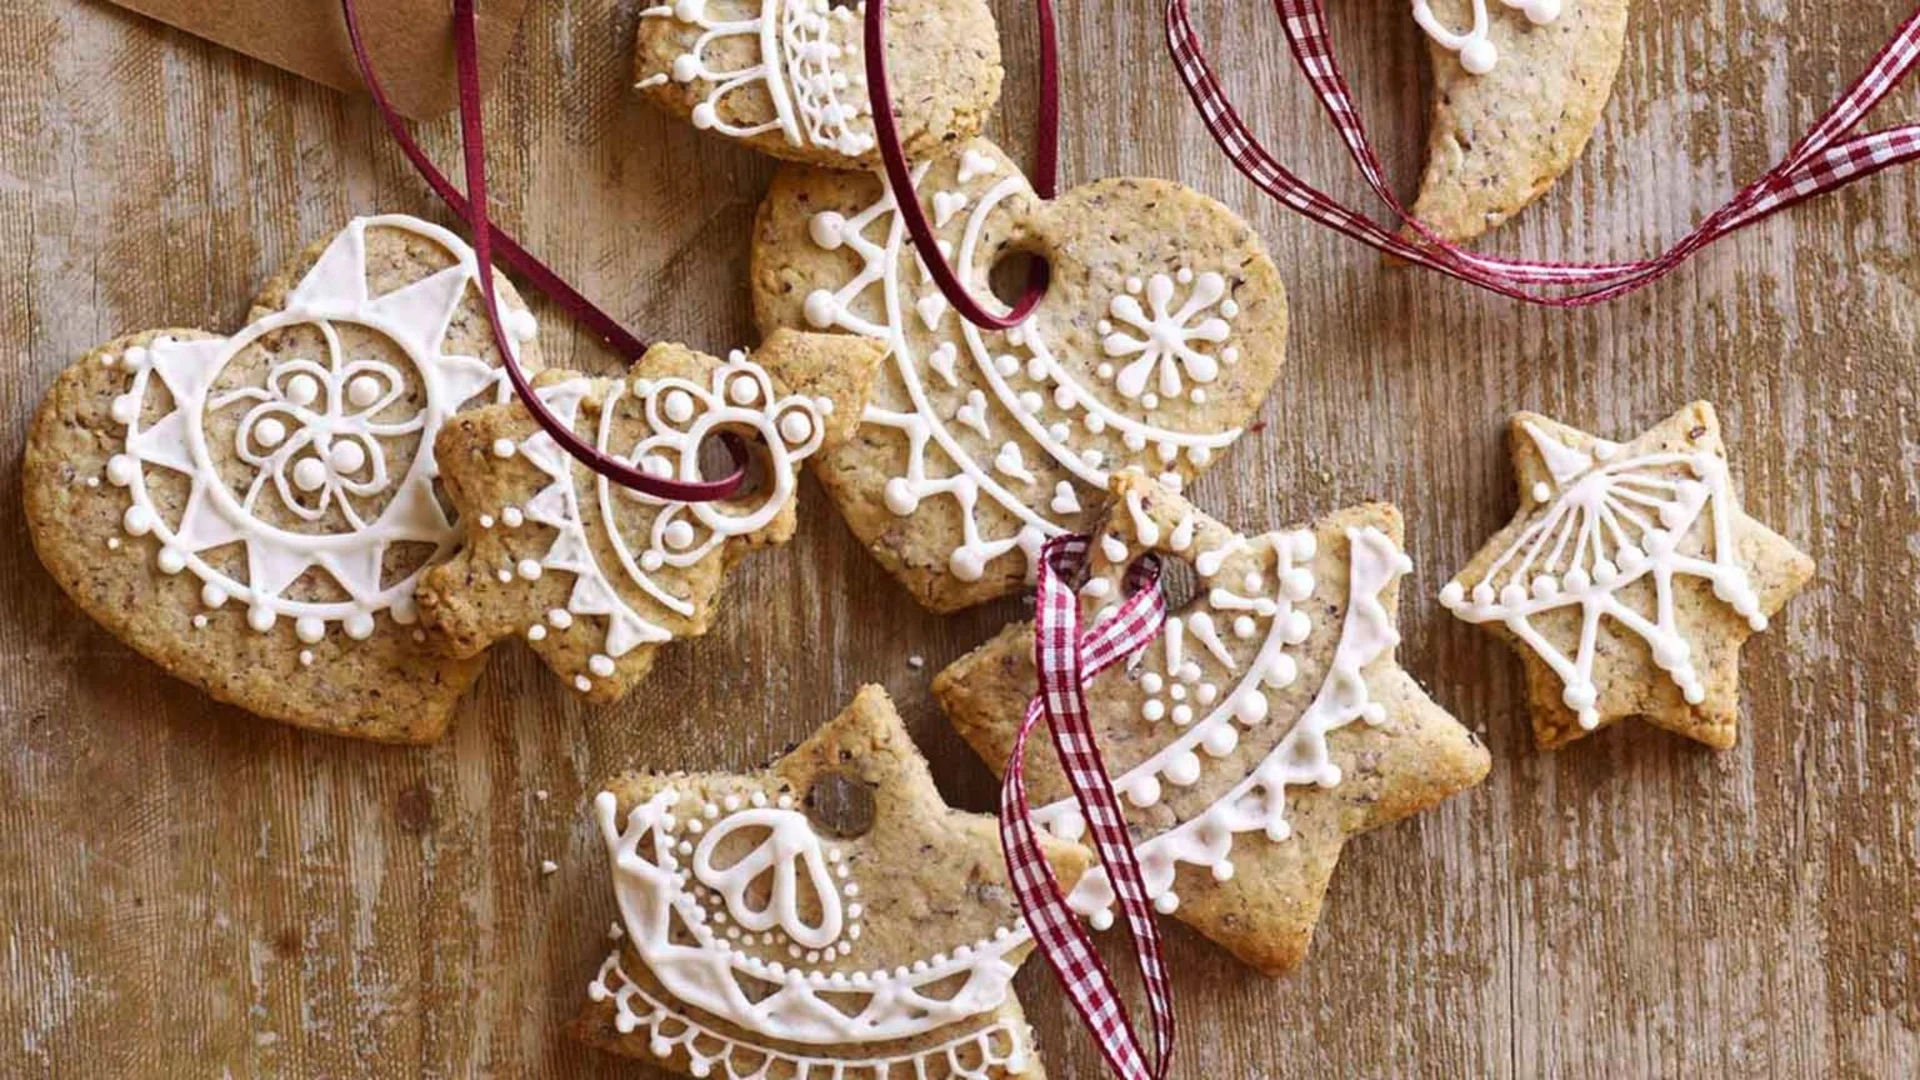 Prettily decorated Christmas biscuits as gift tags